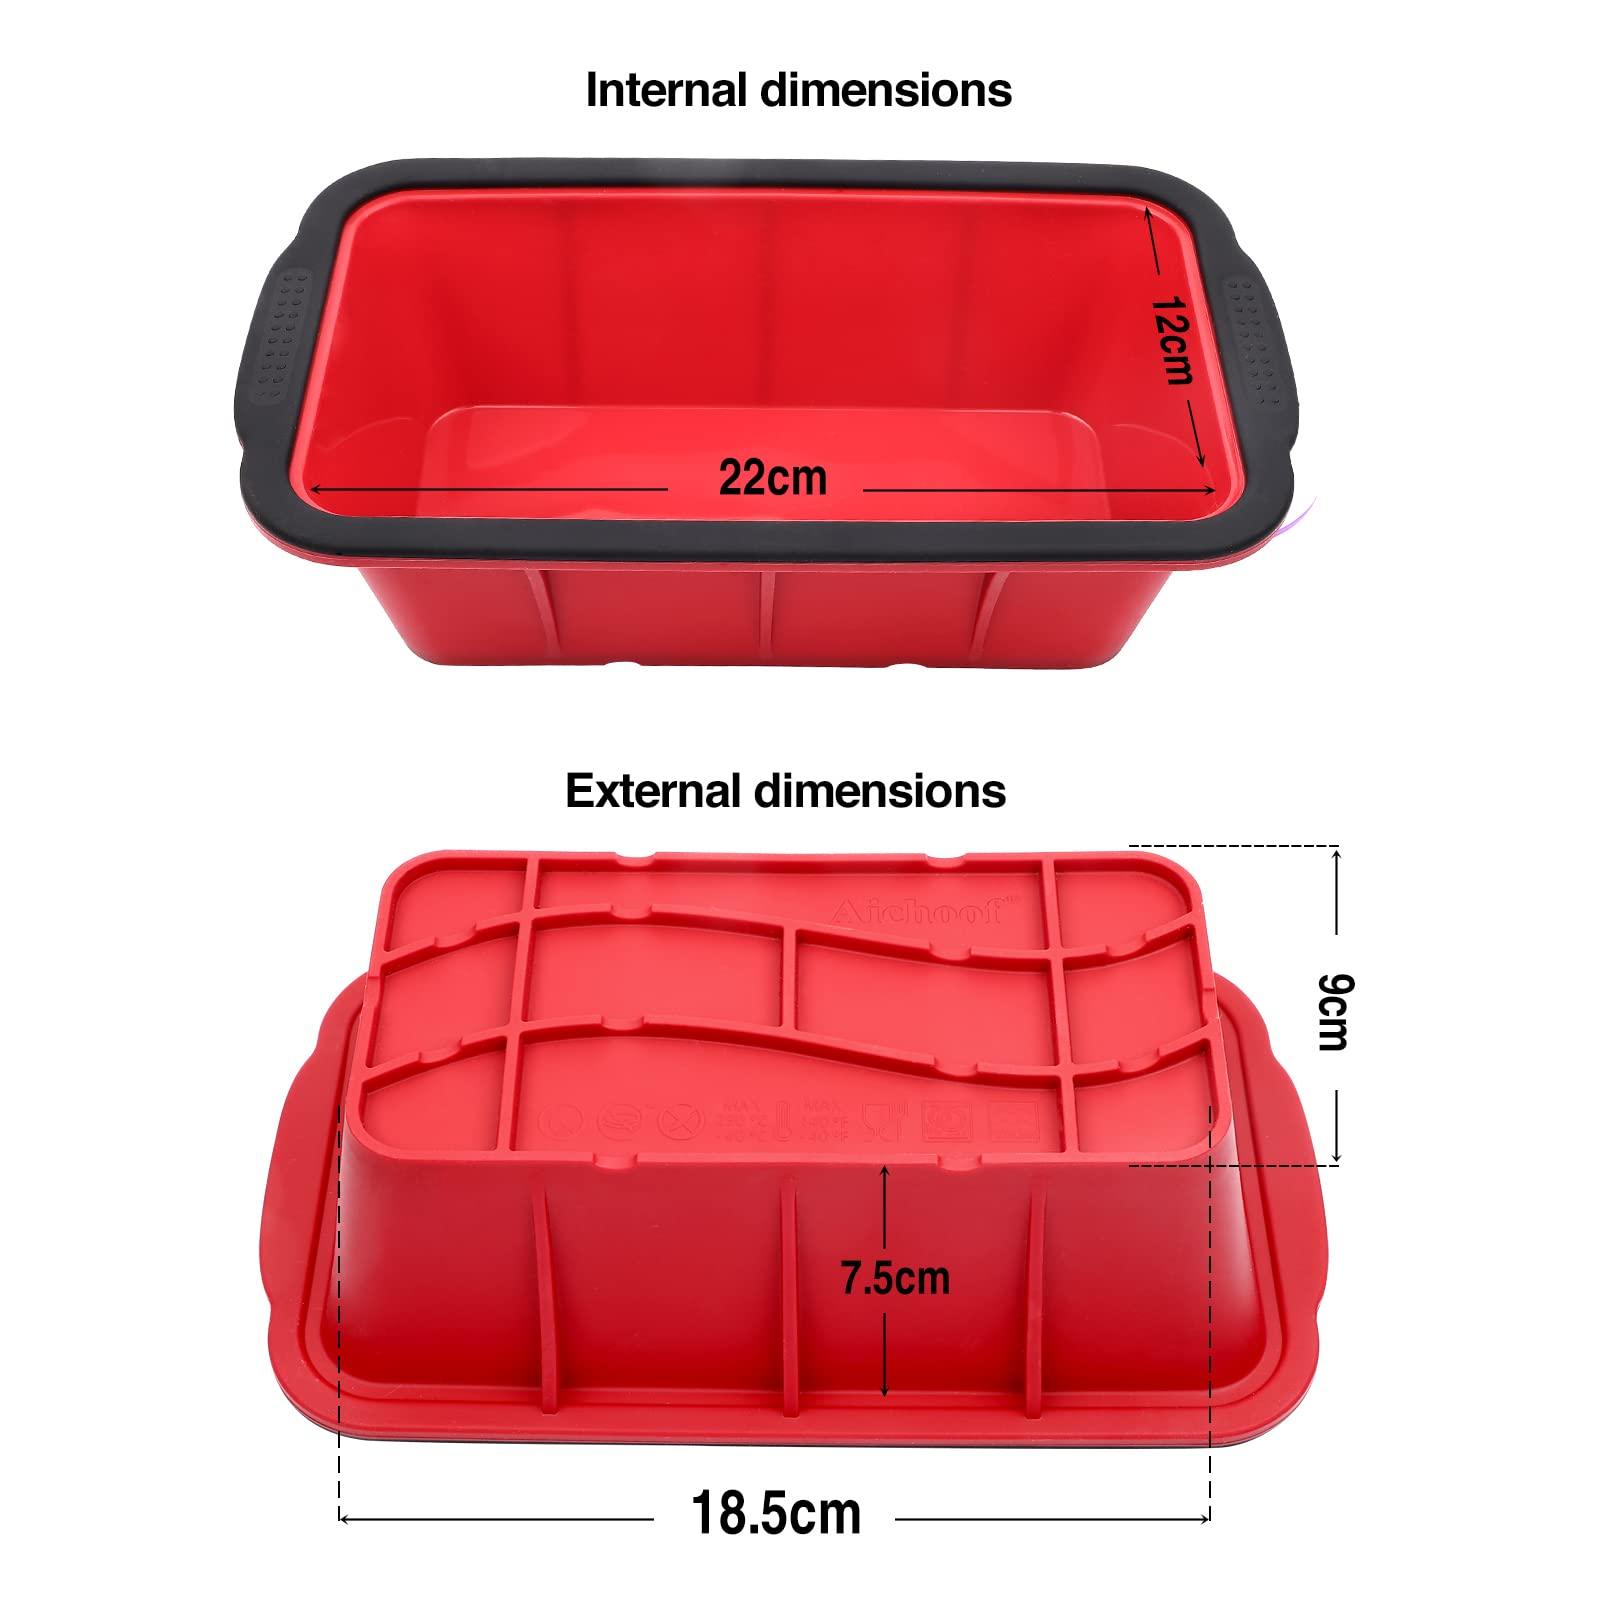 1.5 Pound Non-Stick Silicone Loaf Pan With Reinforced Steel Frame Inside, Meat Loaf Pan Mold For Homemade Baking, Toast, Brownie, Bread, BPA Free, Dishwasher, Microwave, Oven and Freezer Safe (Red) - CookCave